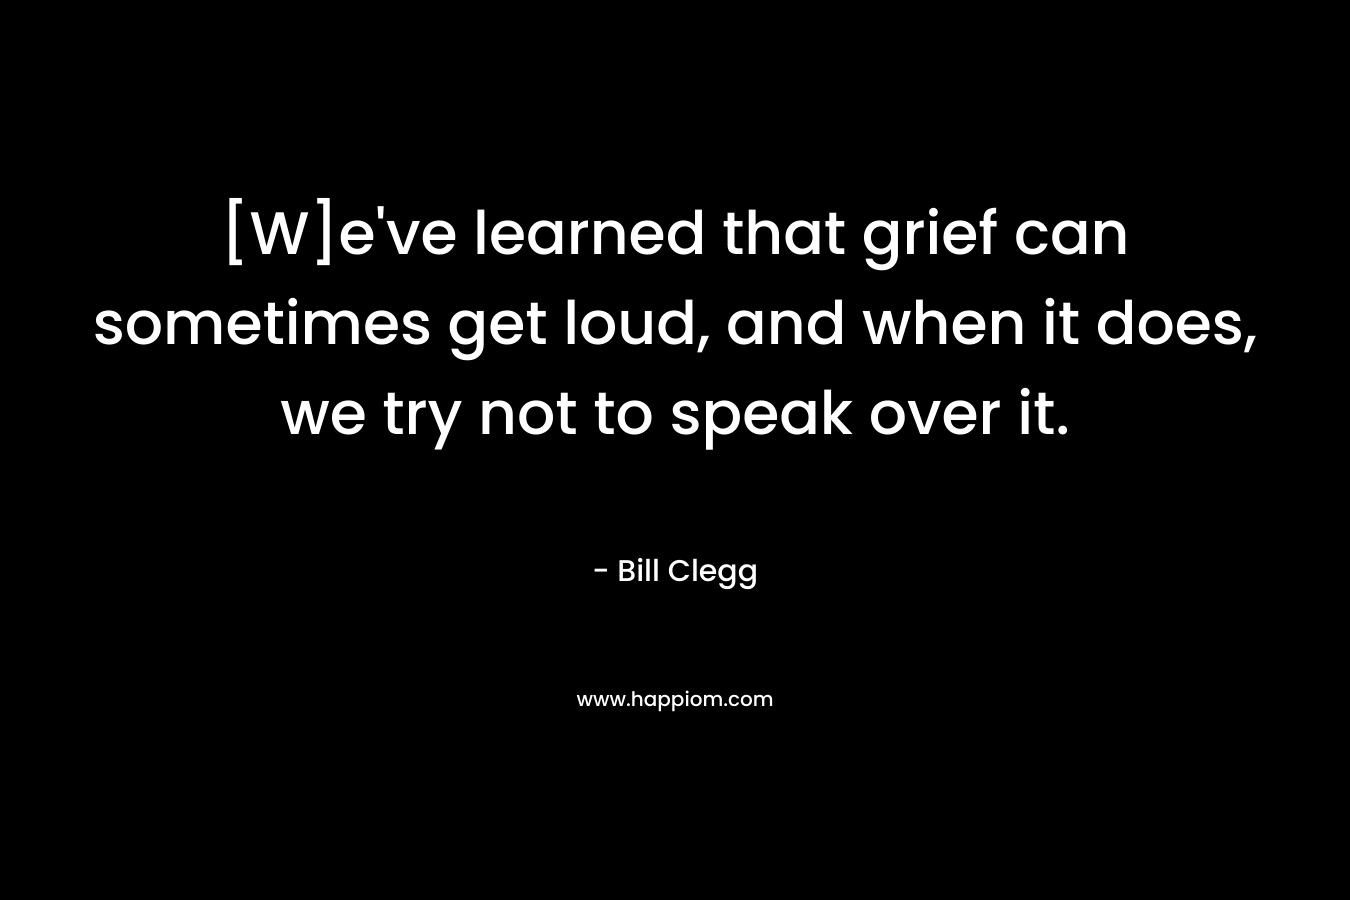 [W]e've learned that grief can sometimes get loud, and when it does, we try not to speak over it.